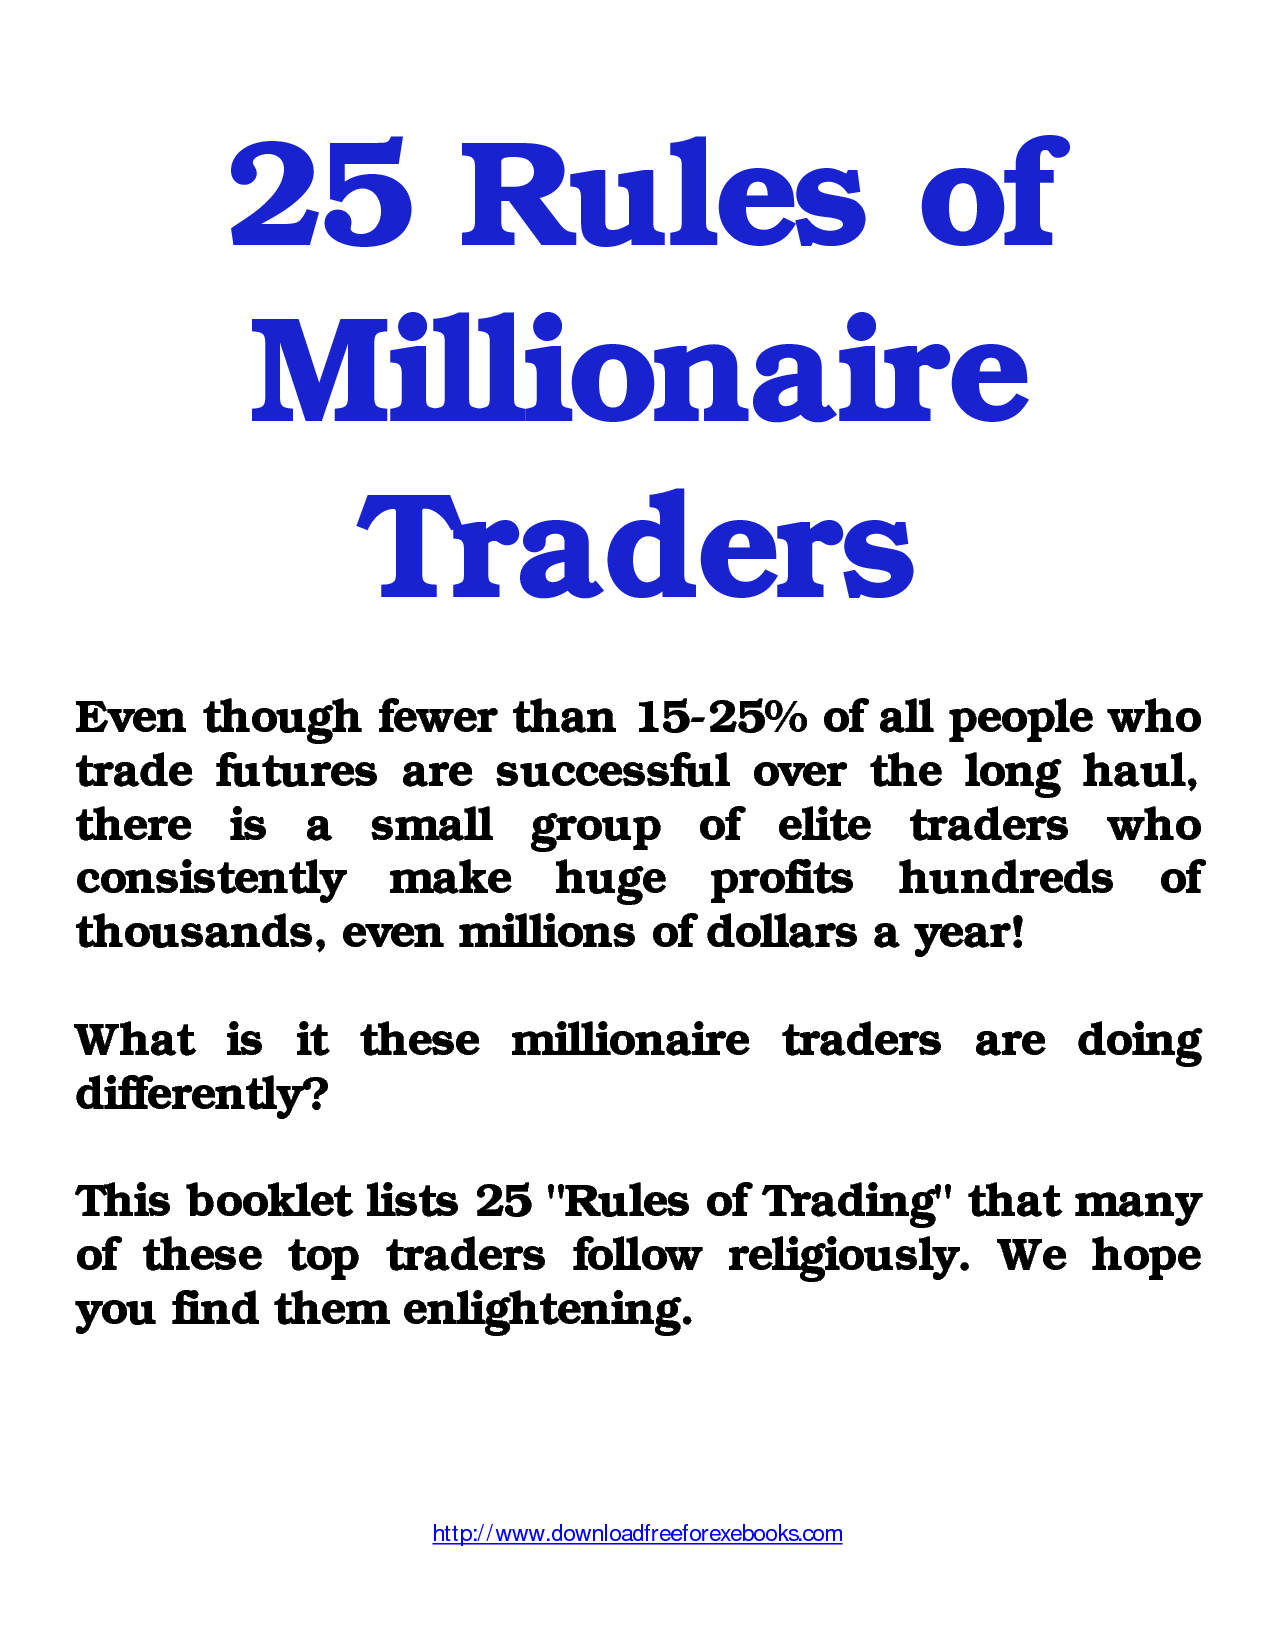 25Rules of Millionaire Traders